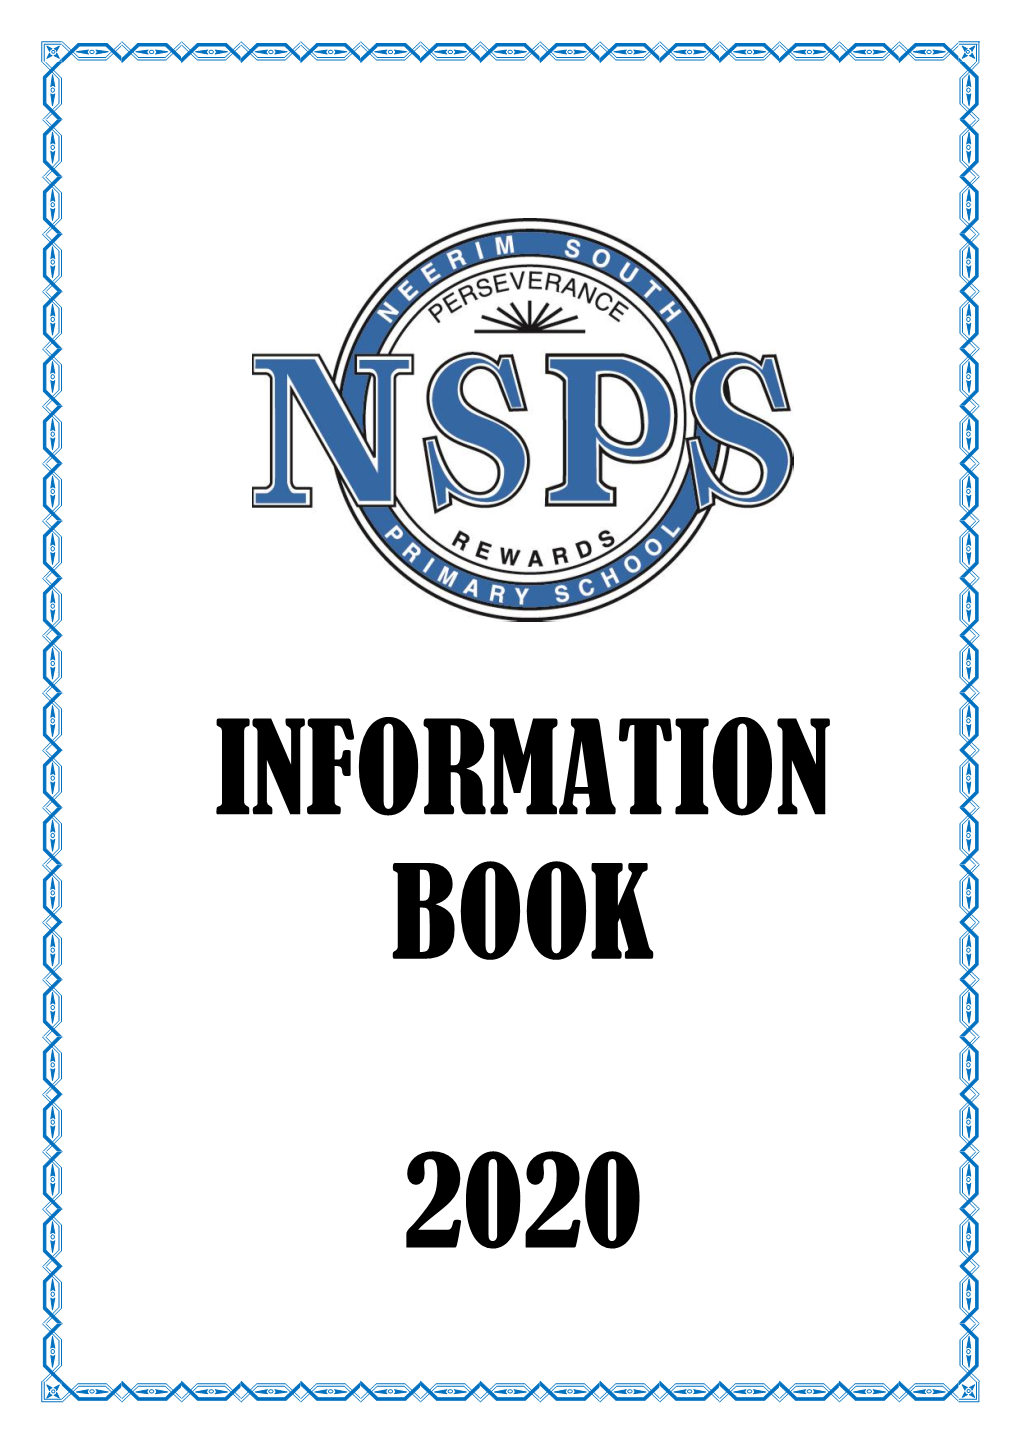 Information Book for 2020